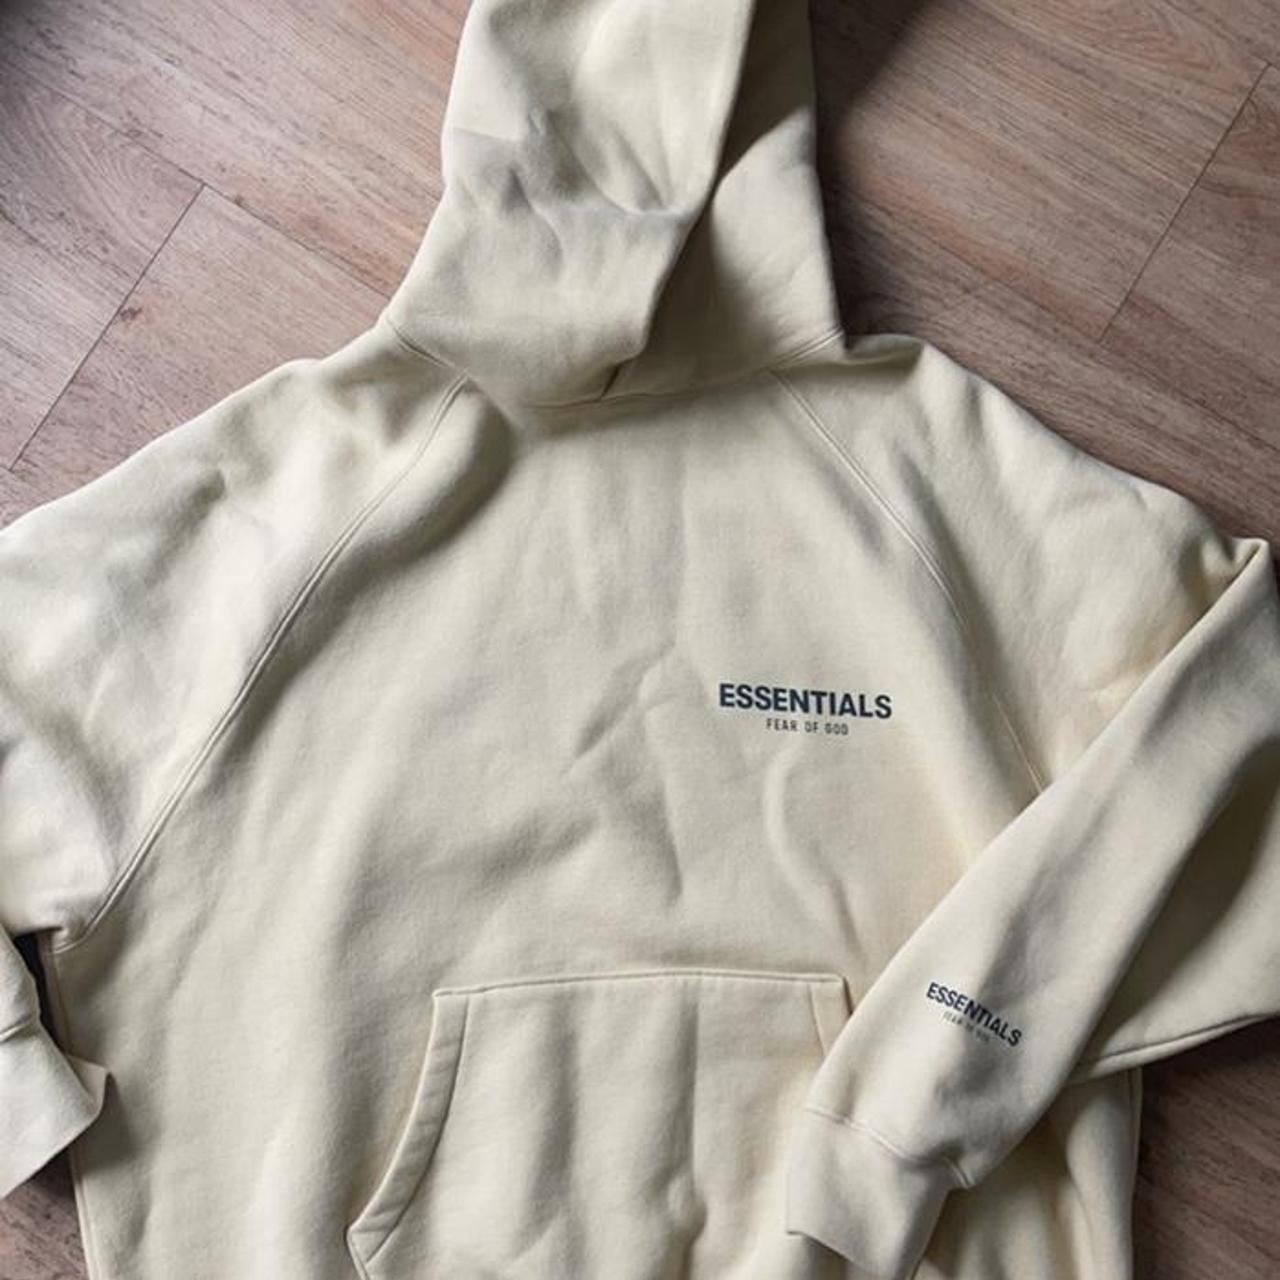 100% authentic Fear of God Essentials hoodie size... - Depop